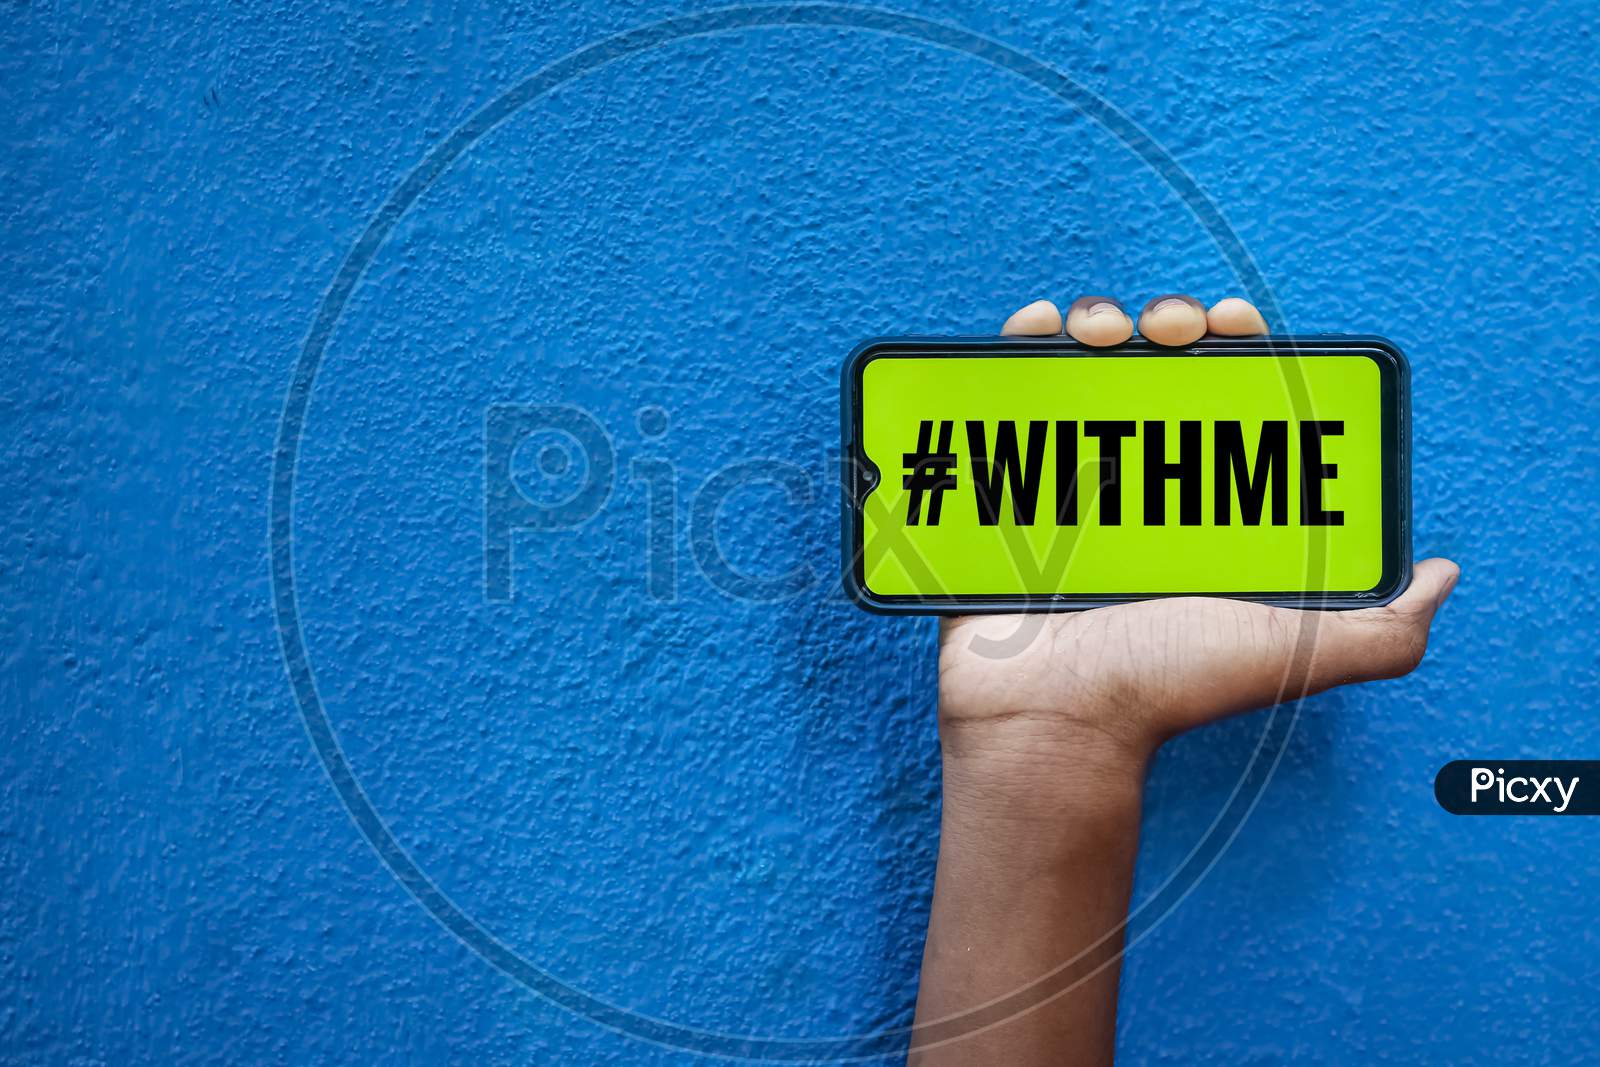 Hashtag Withme World On Smart Phone Screen Isolated On Blue Background With Copy Space For Text. Person Holding Mobile On His Hand And Showing Front Of #Withme Hashtag.